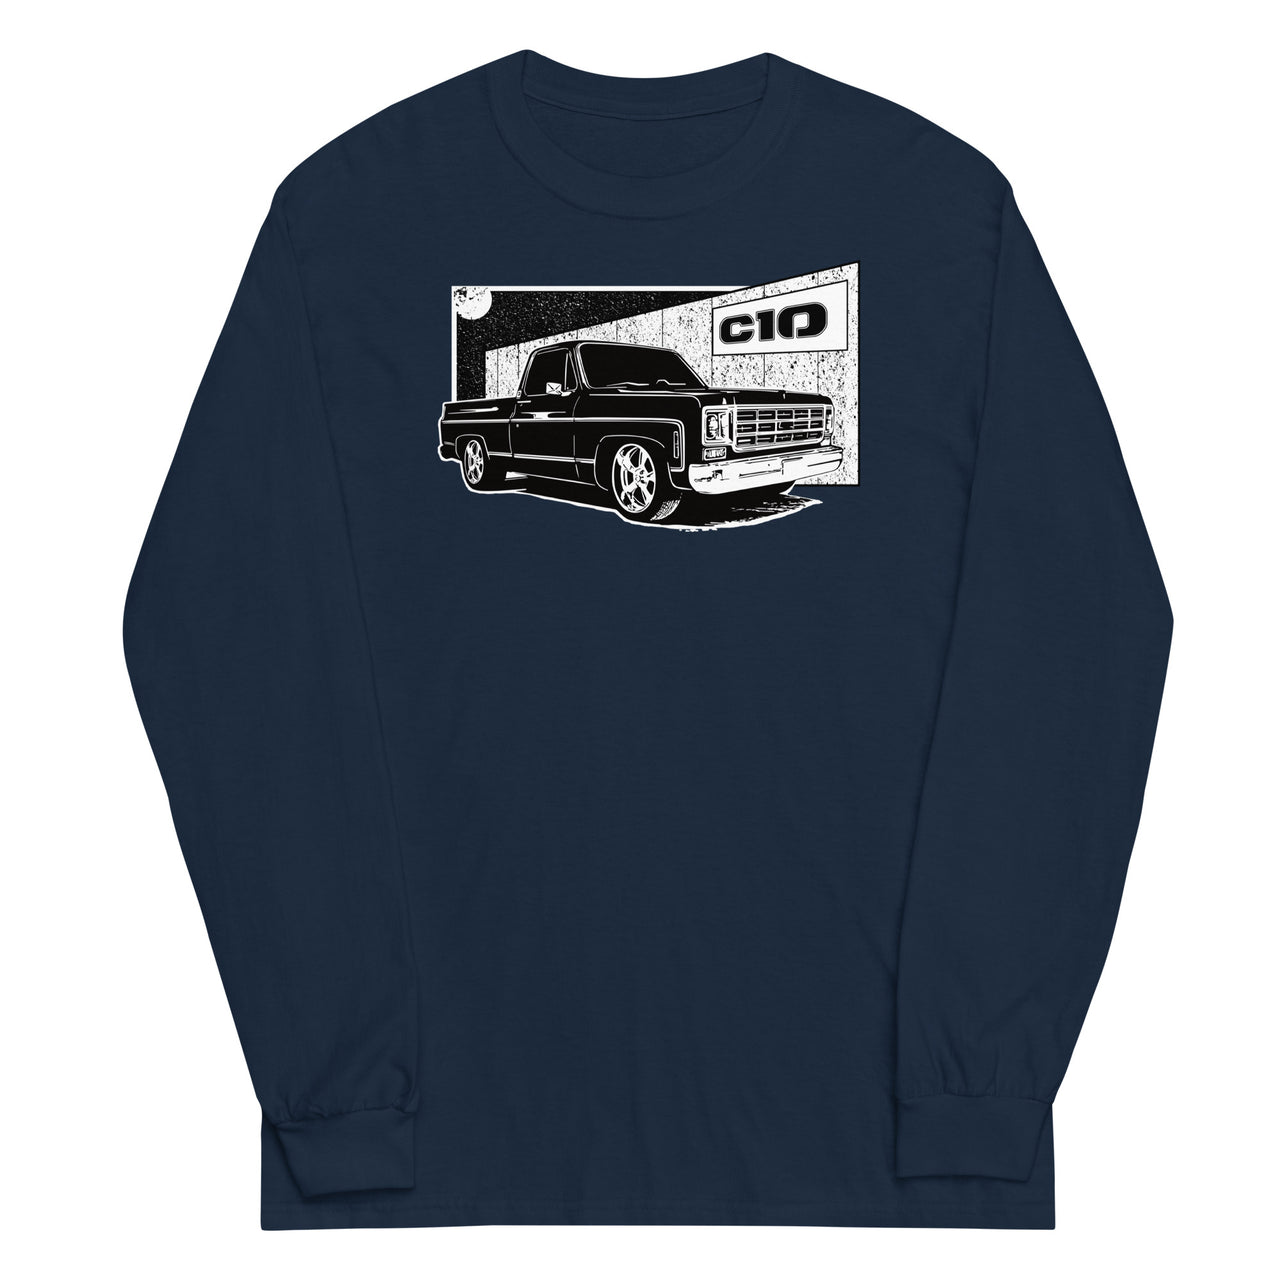 77 Square Body C10 Long Sleeve T-Shirt in navy